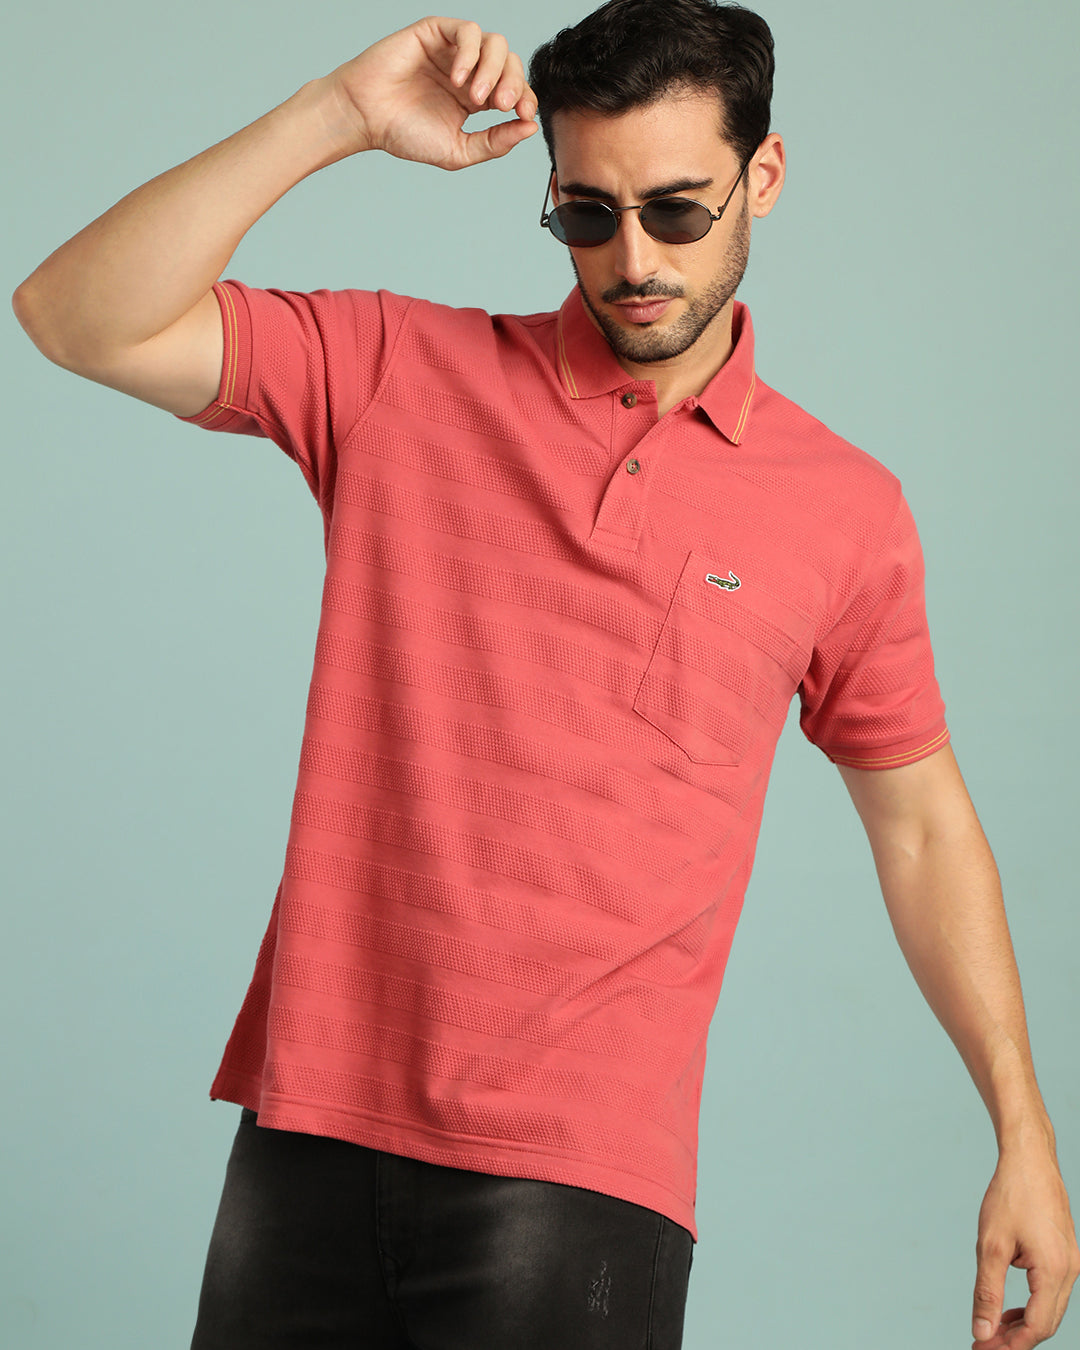 Honey Comb Textured Stripe Polo Mineral Red T-Shirt